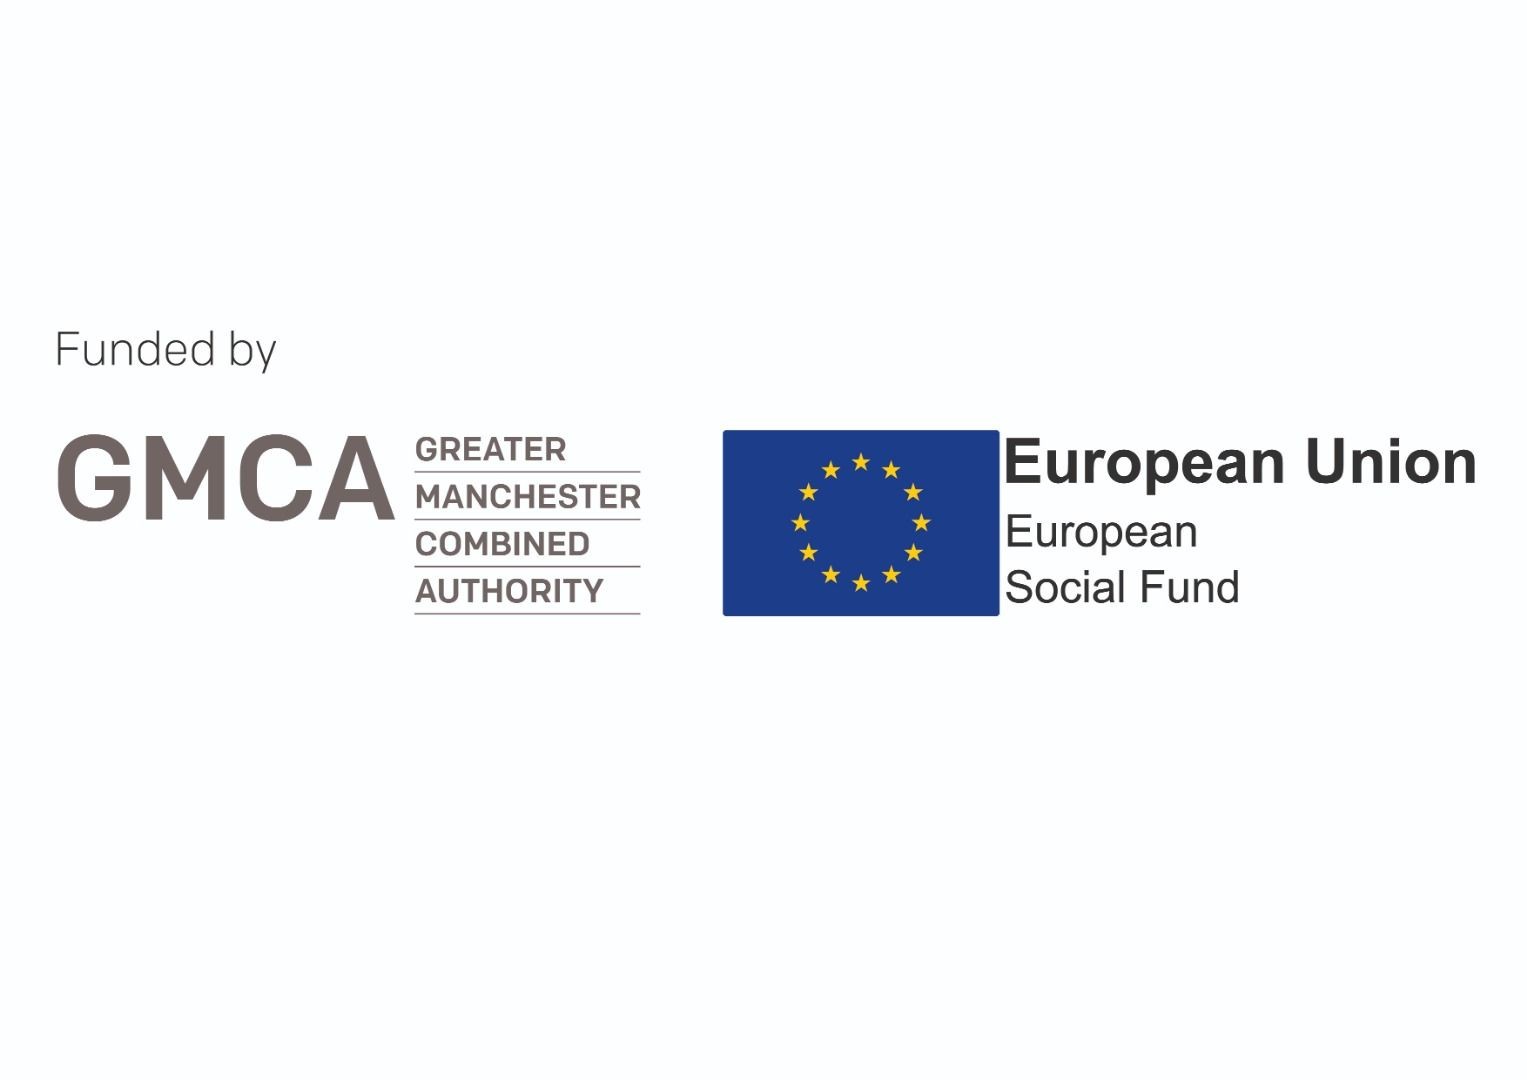 Greater Manchester Combined Authority Logo & European Social Union Fund Logo